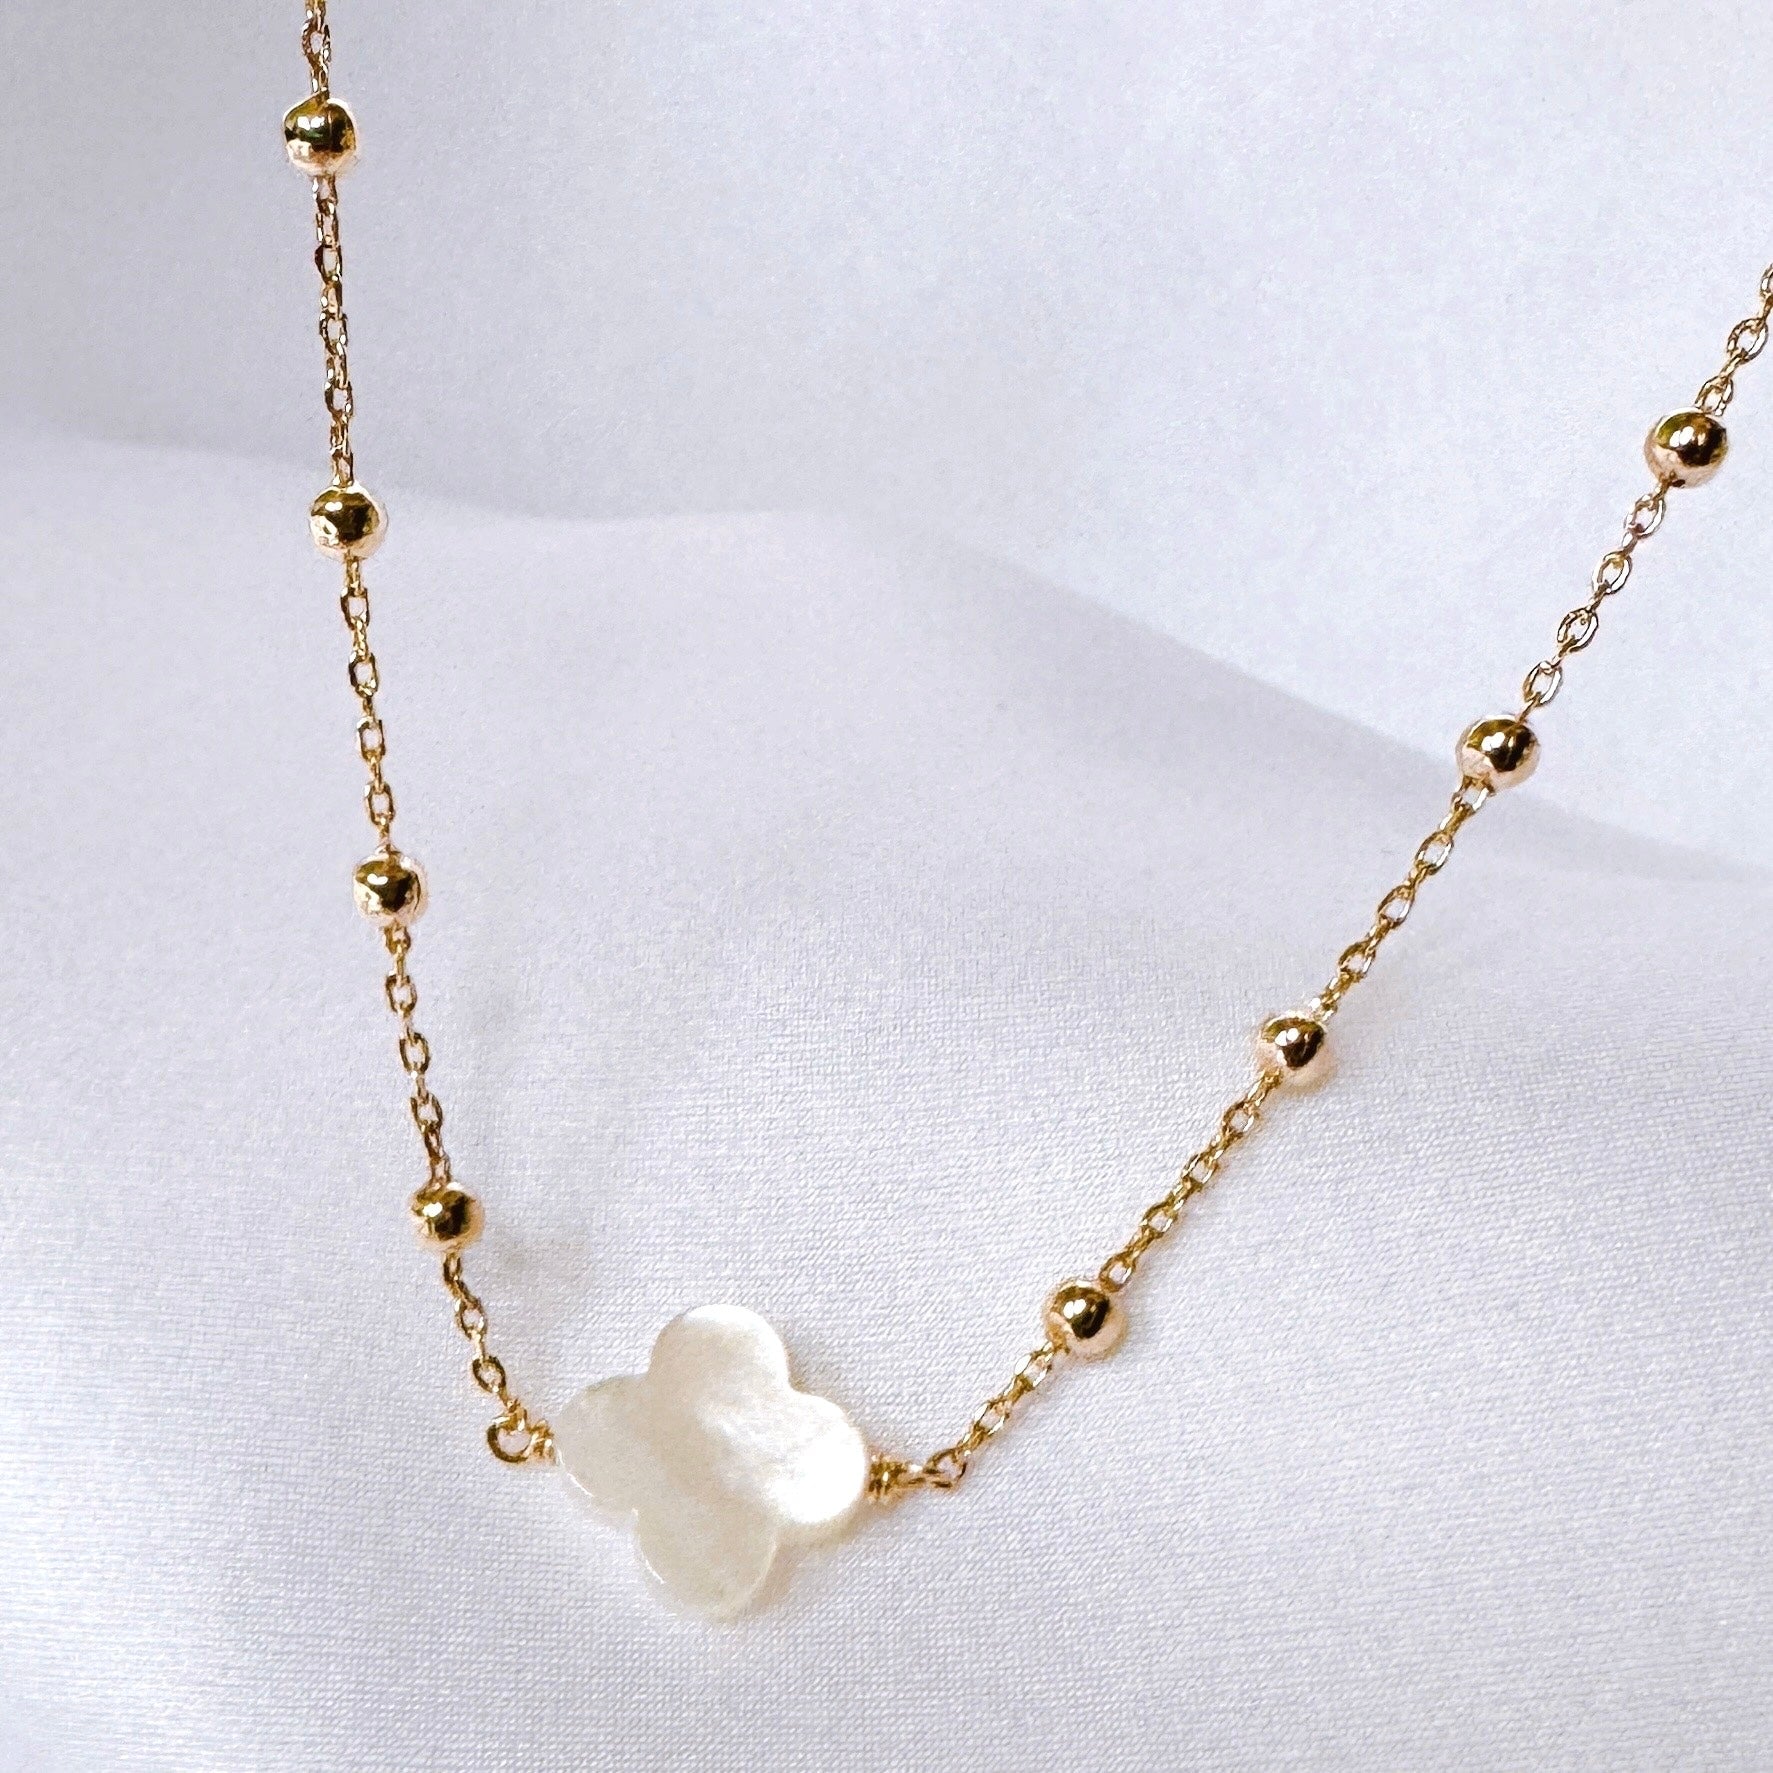 Gold-plated “Pearly Clover” necklace